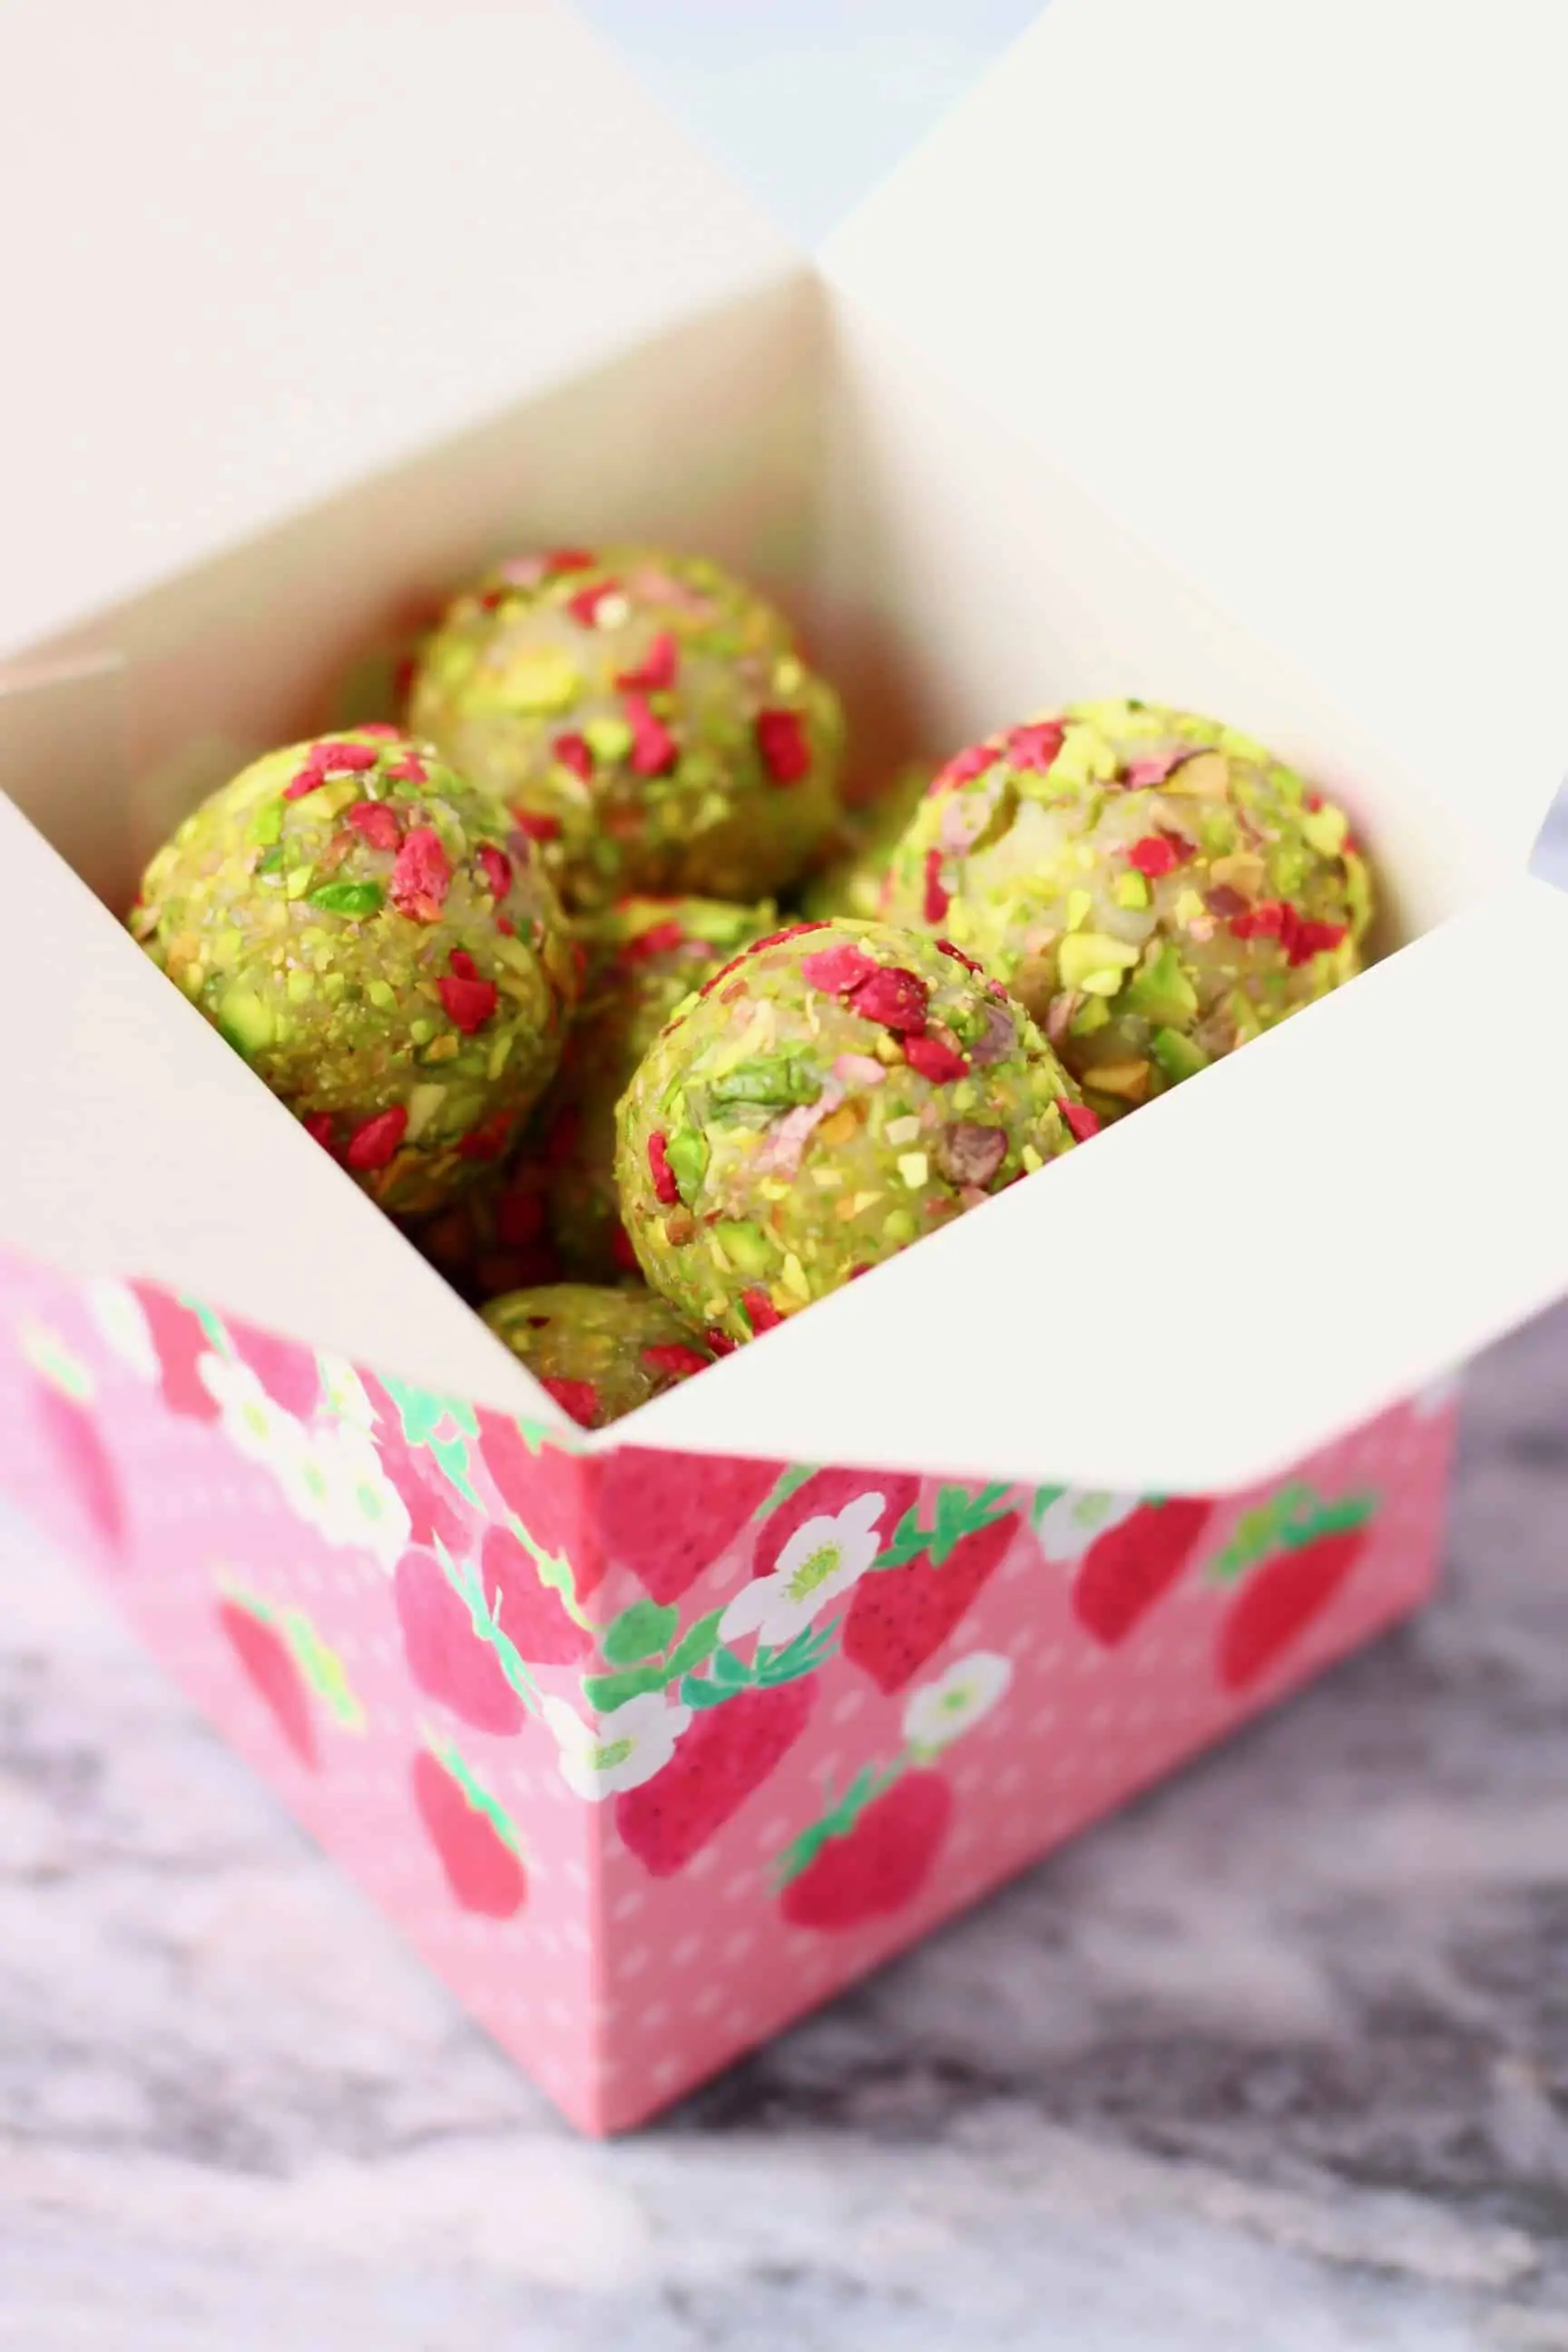 Vegan white chocolate truffles covered with chopped pistachios and freeze-dried raspberries in a small pink gift box 